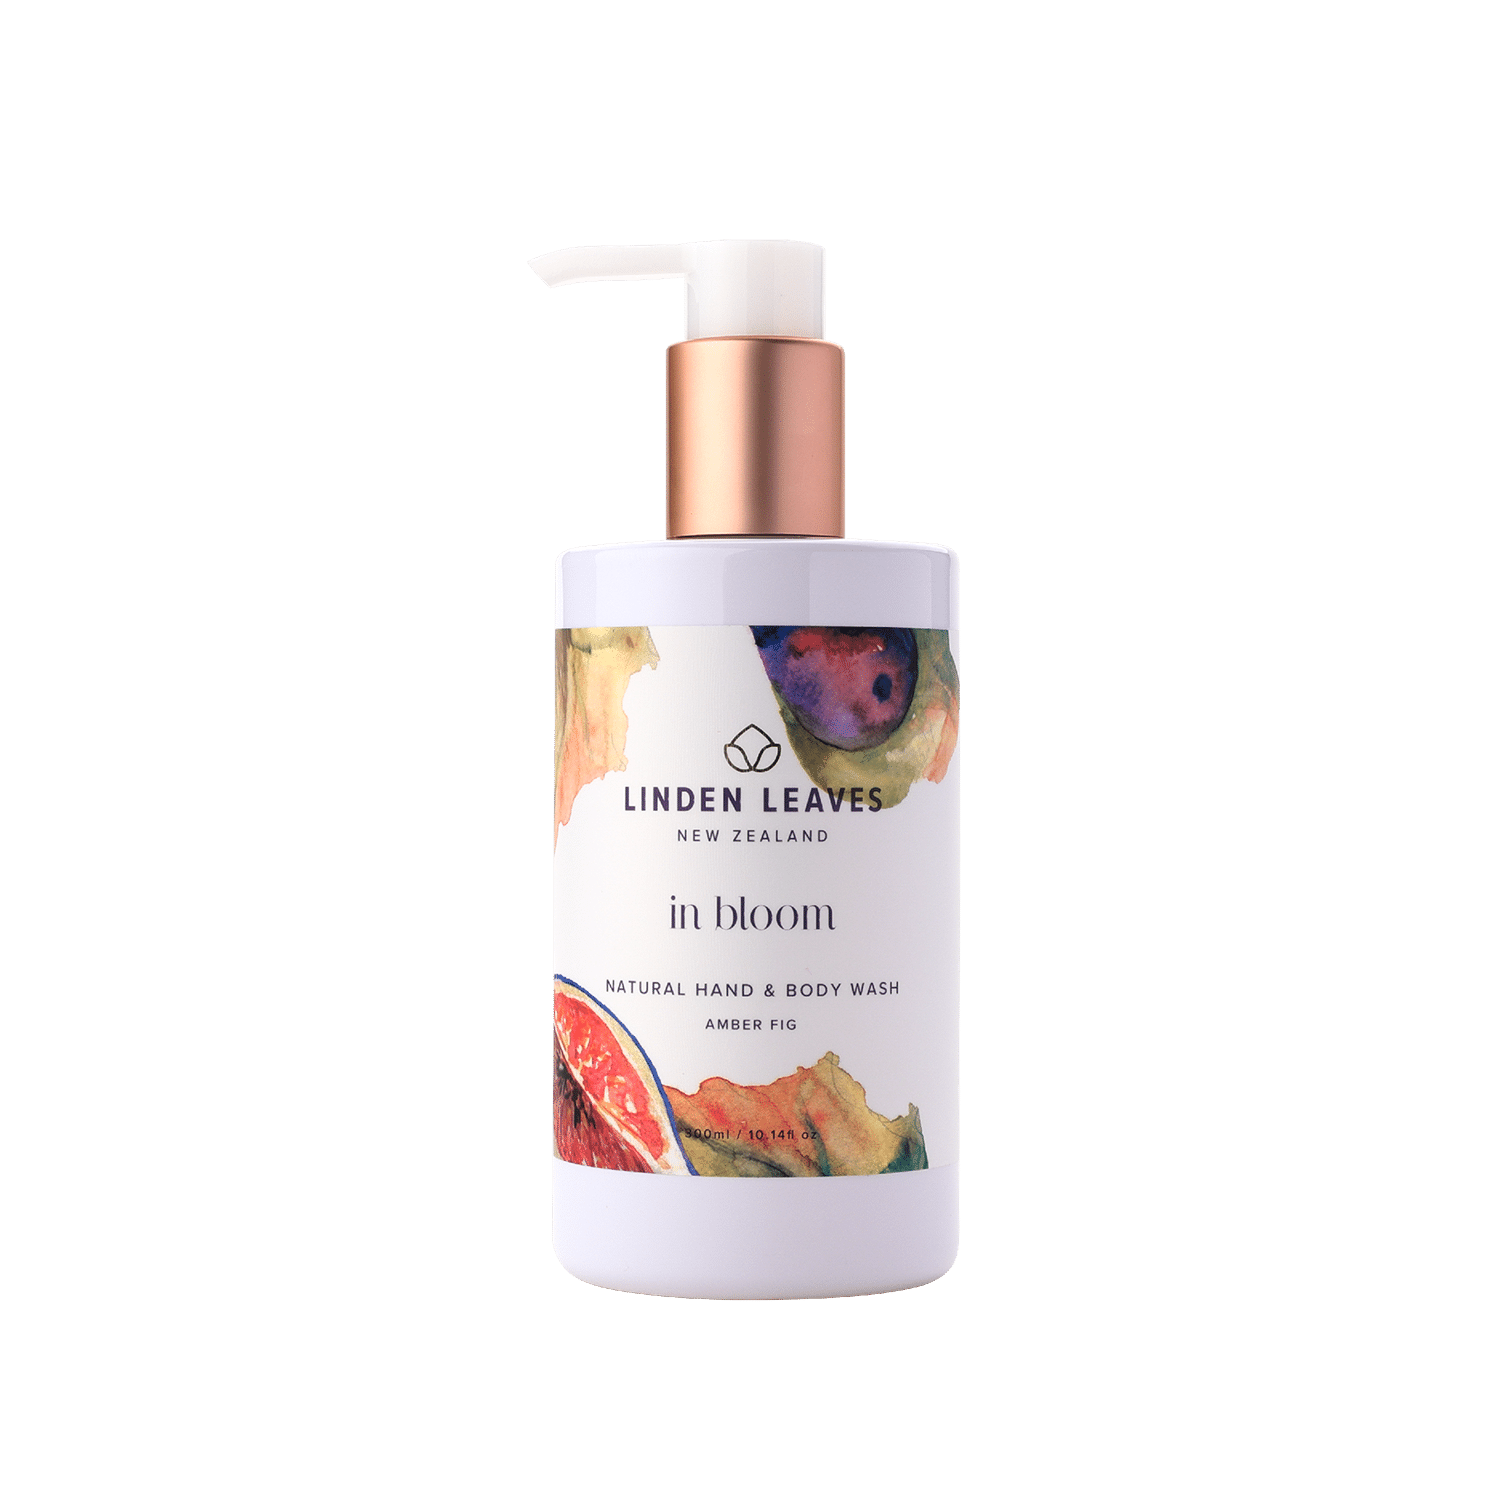 Linden Leaves 琳登丽诗 in bloom 绽放系列 hand & body wash 沐浴露 amber fig 琥珀红心果 300ml